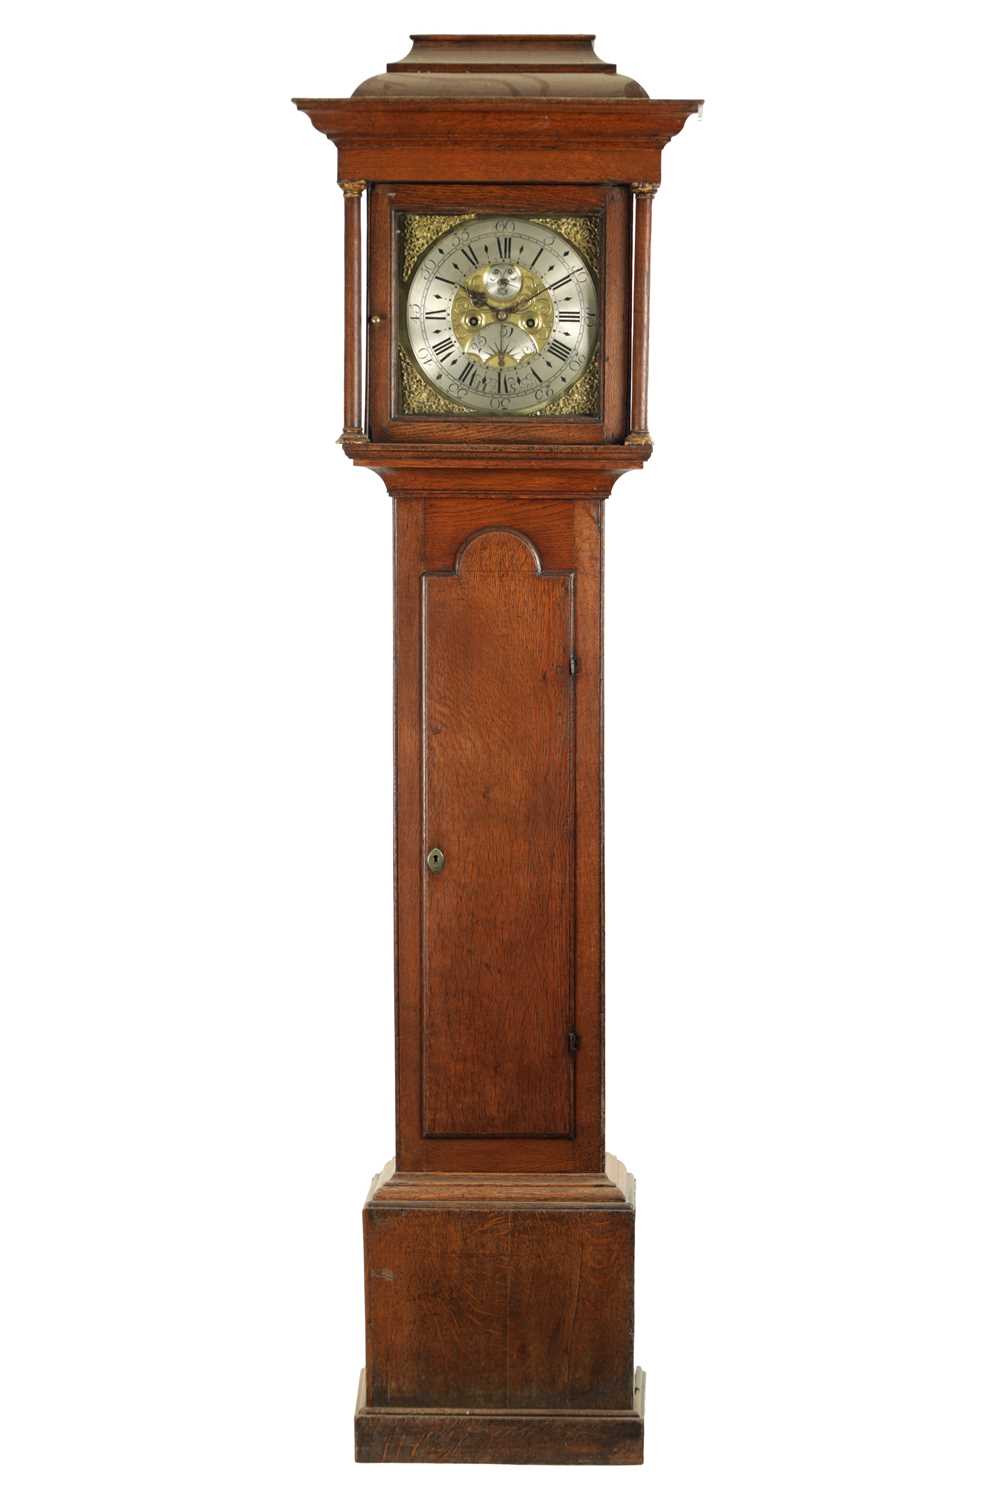 Lot 1211 - HENRY SOUTH, A MID 18TH CENTURY EIGHT DAY LONGCASE CLOCK